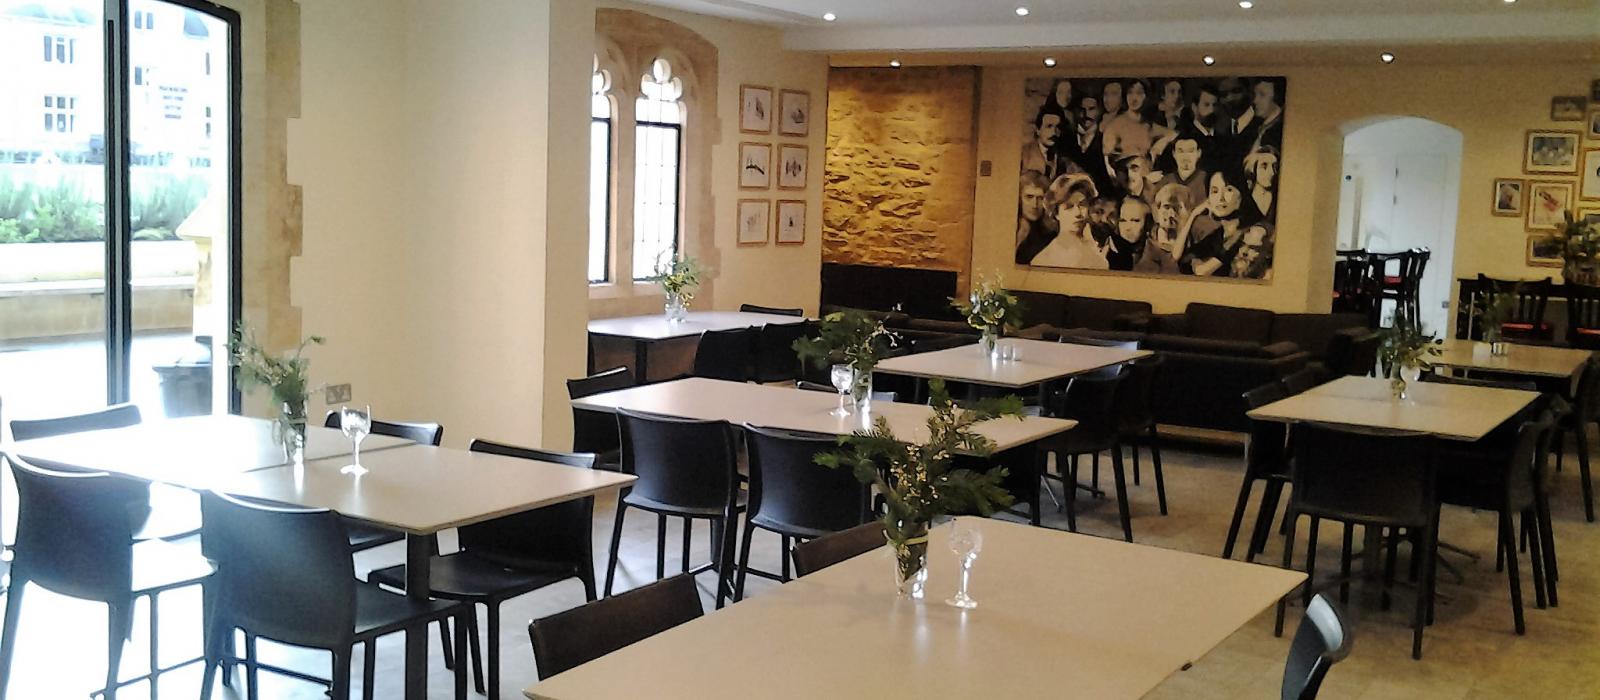 The Crypt Cafeteria and Bar, Mansfield College